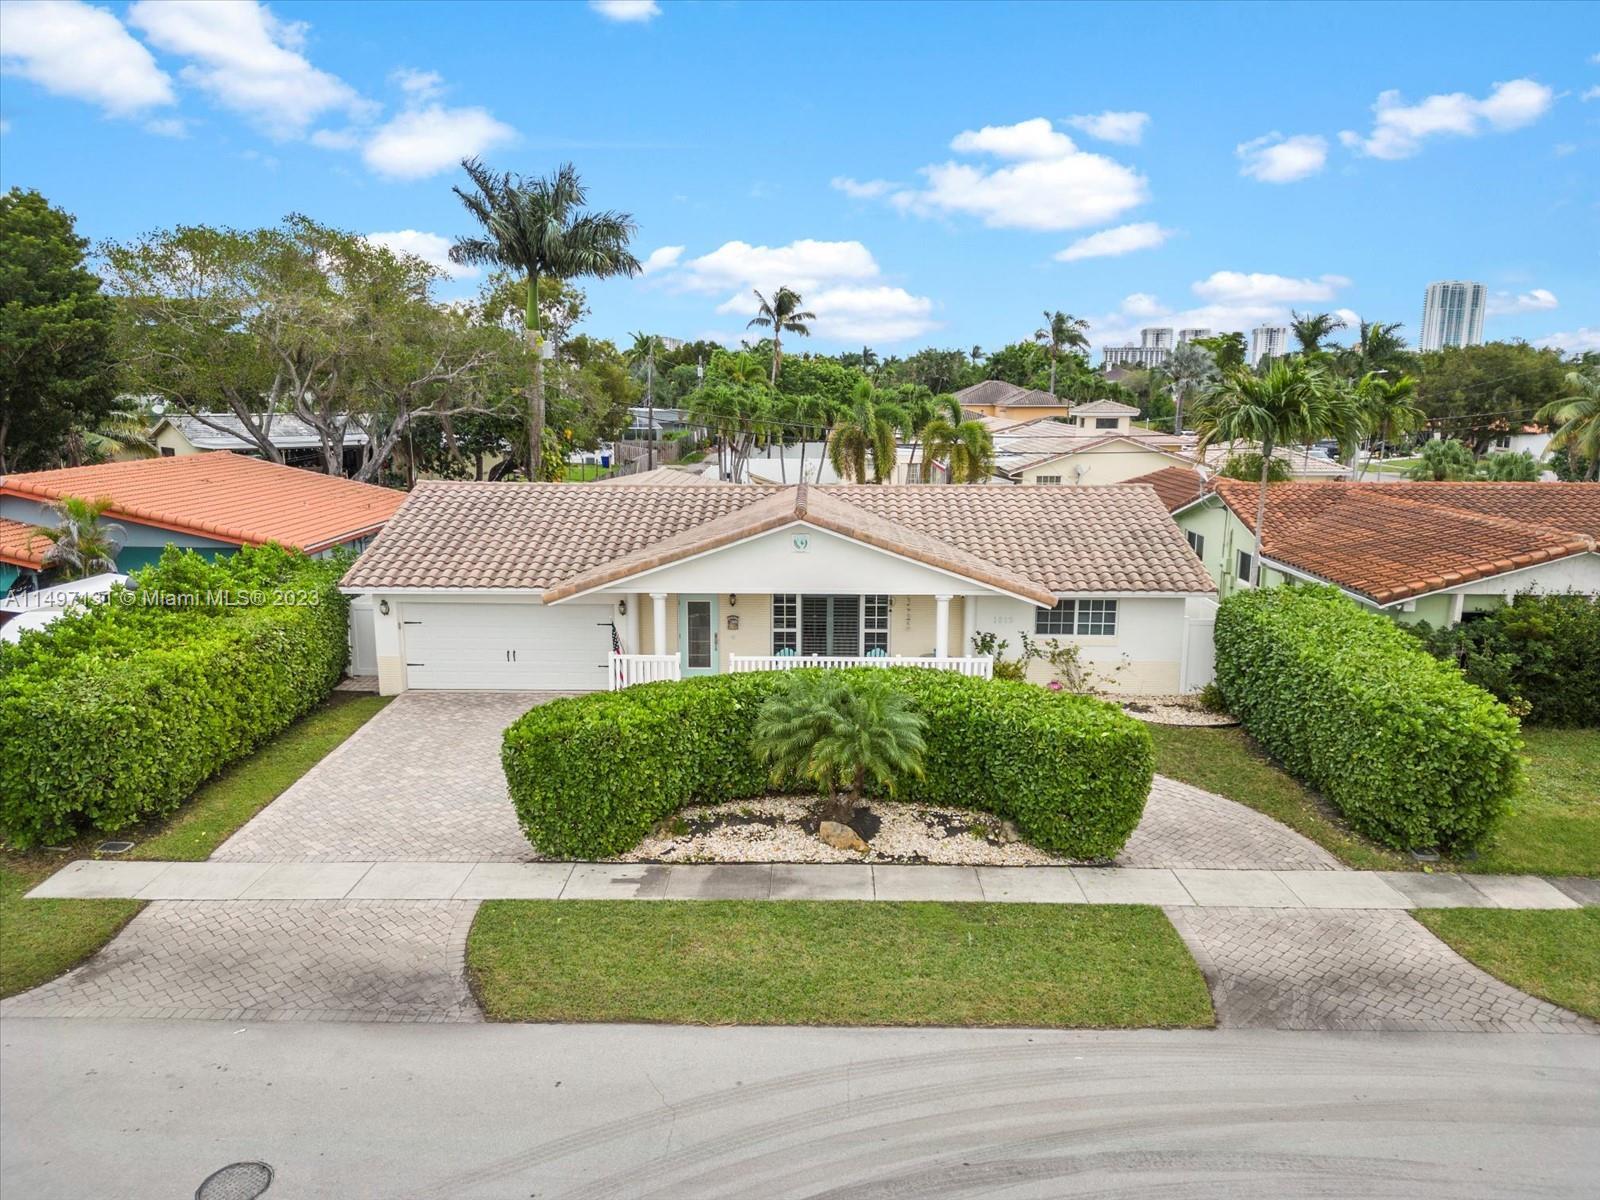 Photo of 1015 S 13th Ave in Hollywood, FL